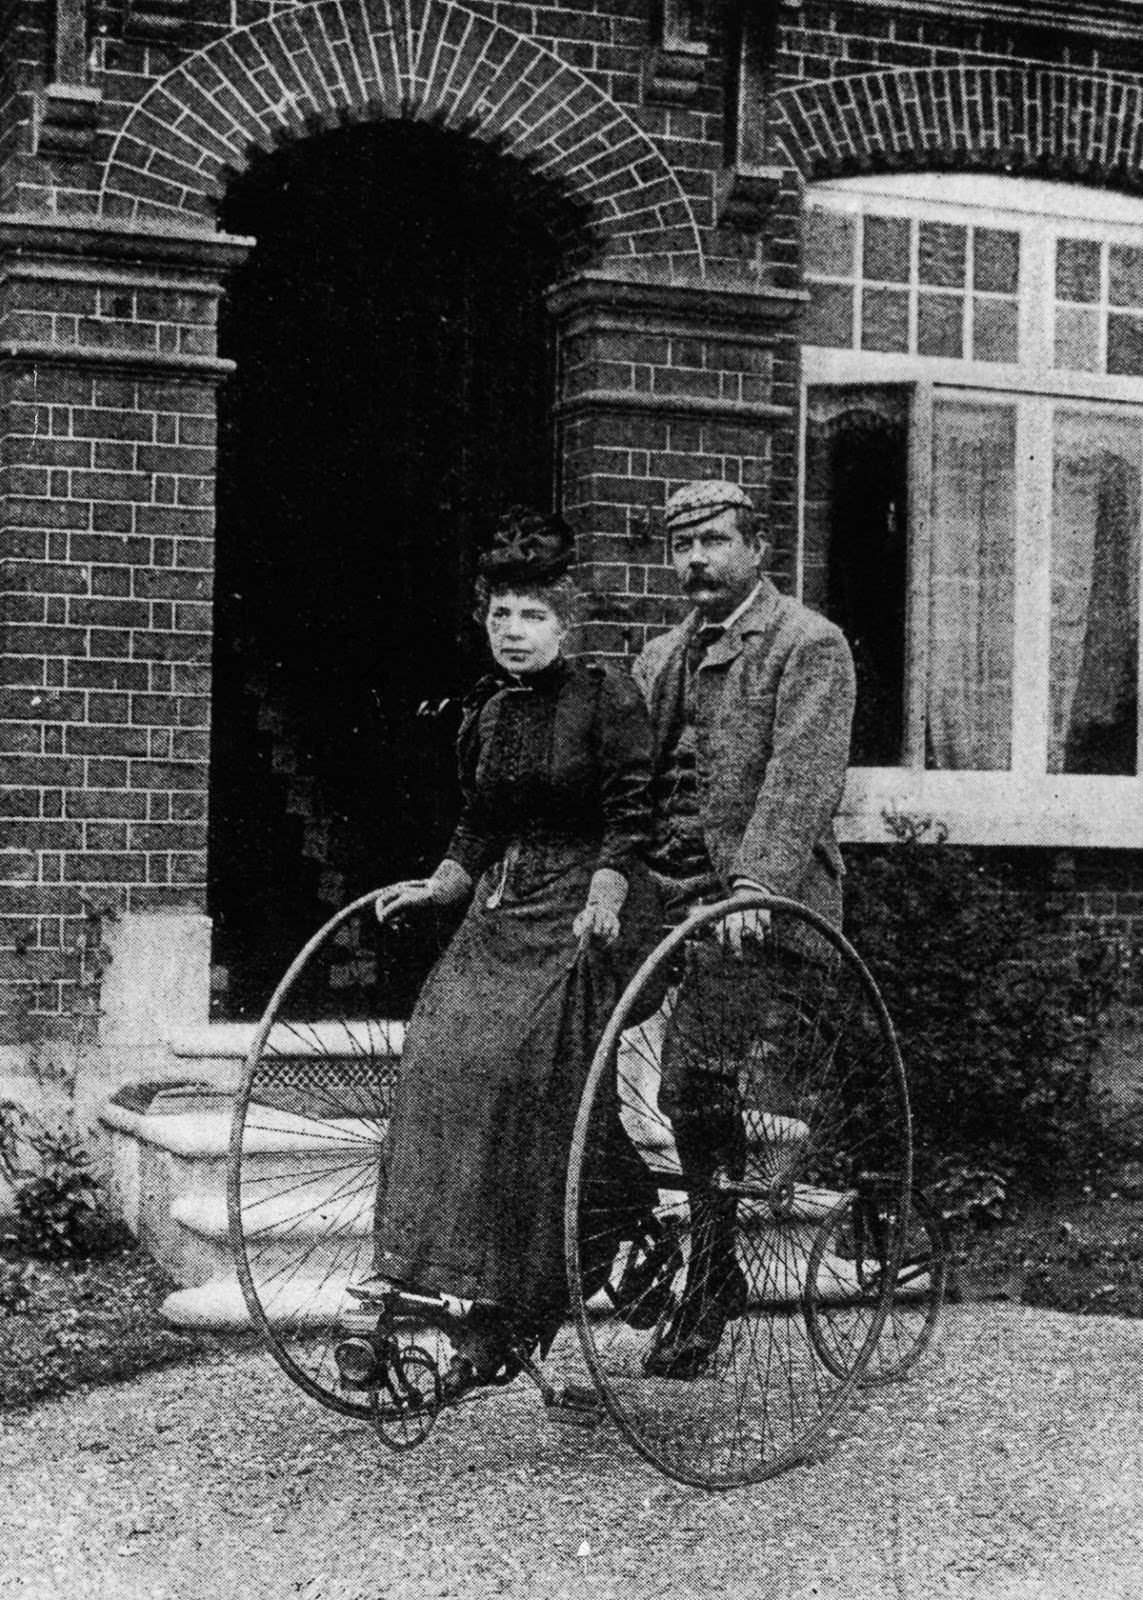 Sir Arthur Conan Doyle and his wife ride a tandem tricycle, 1895.